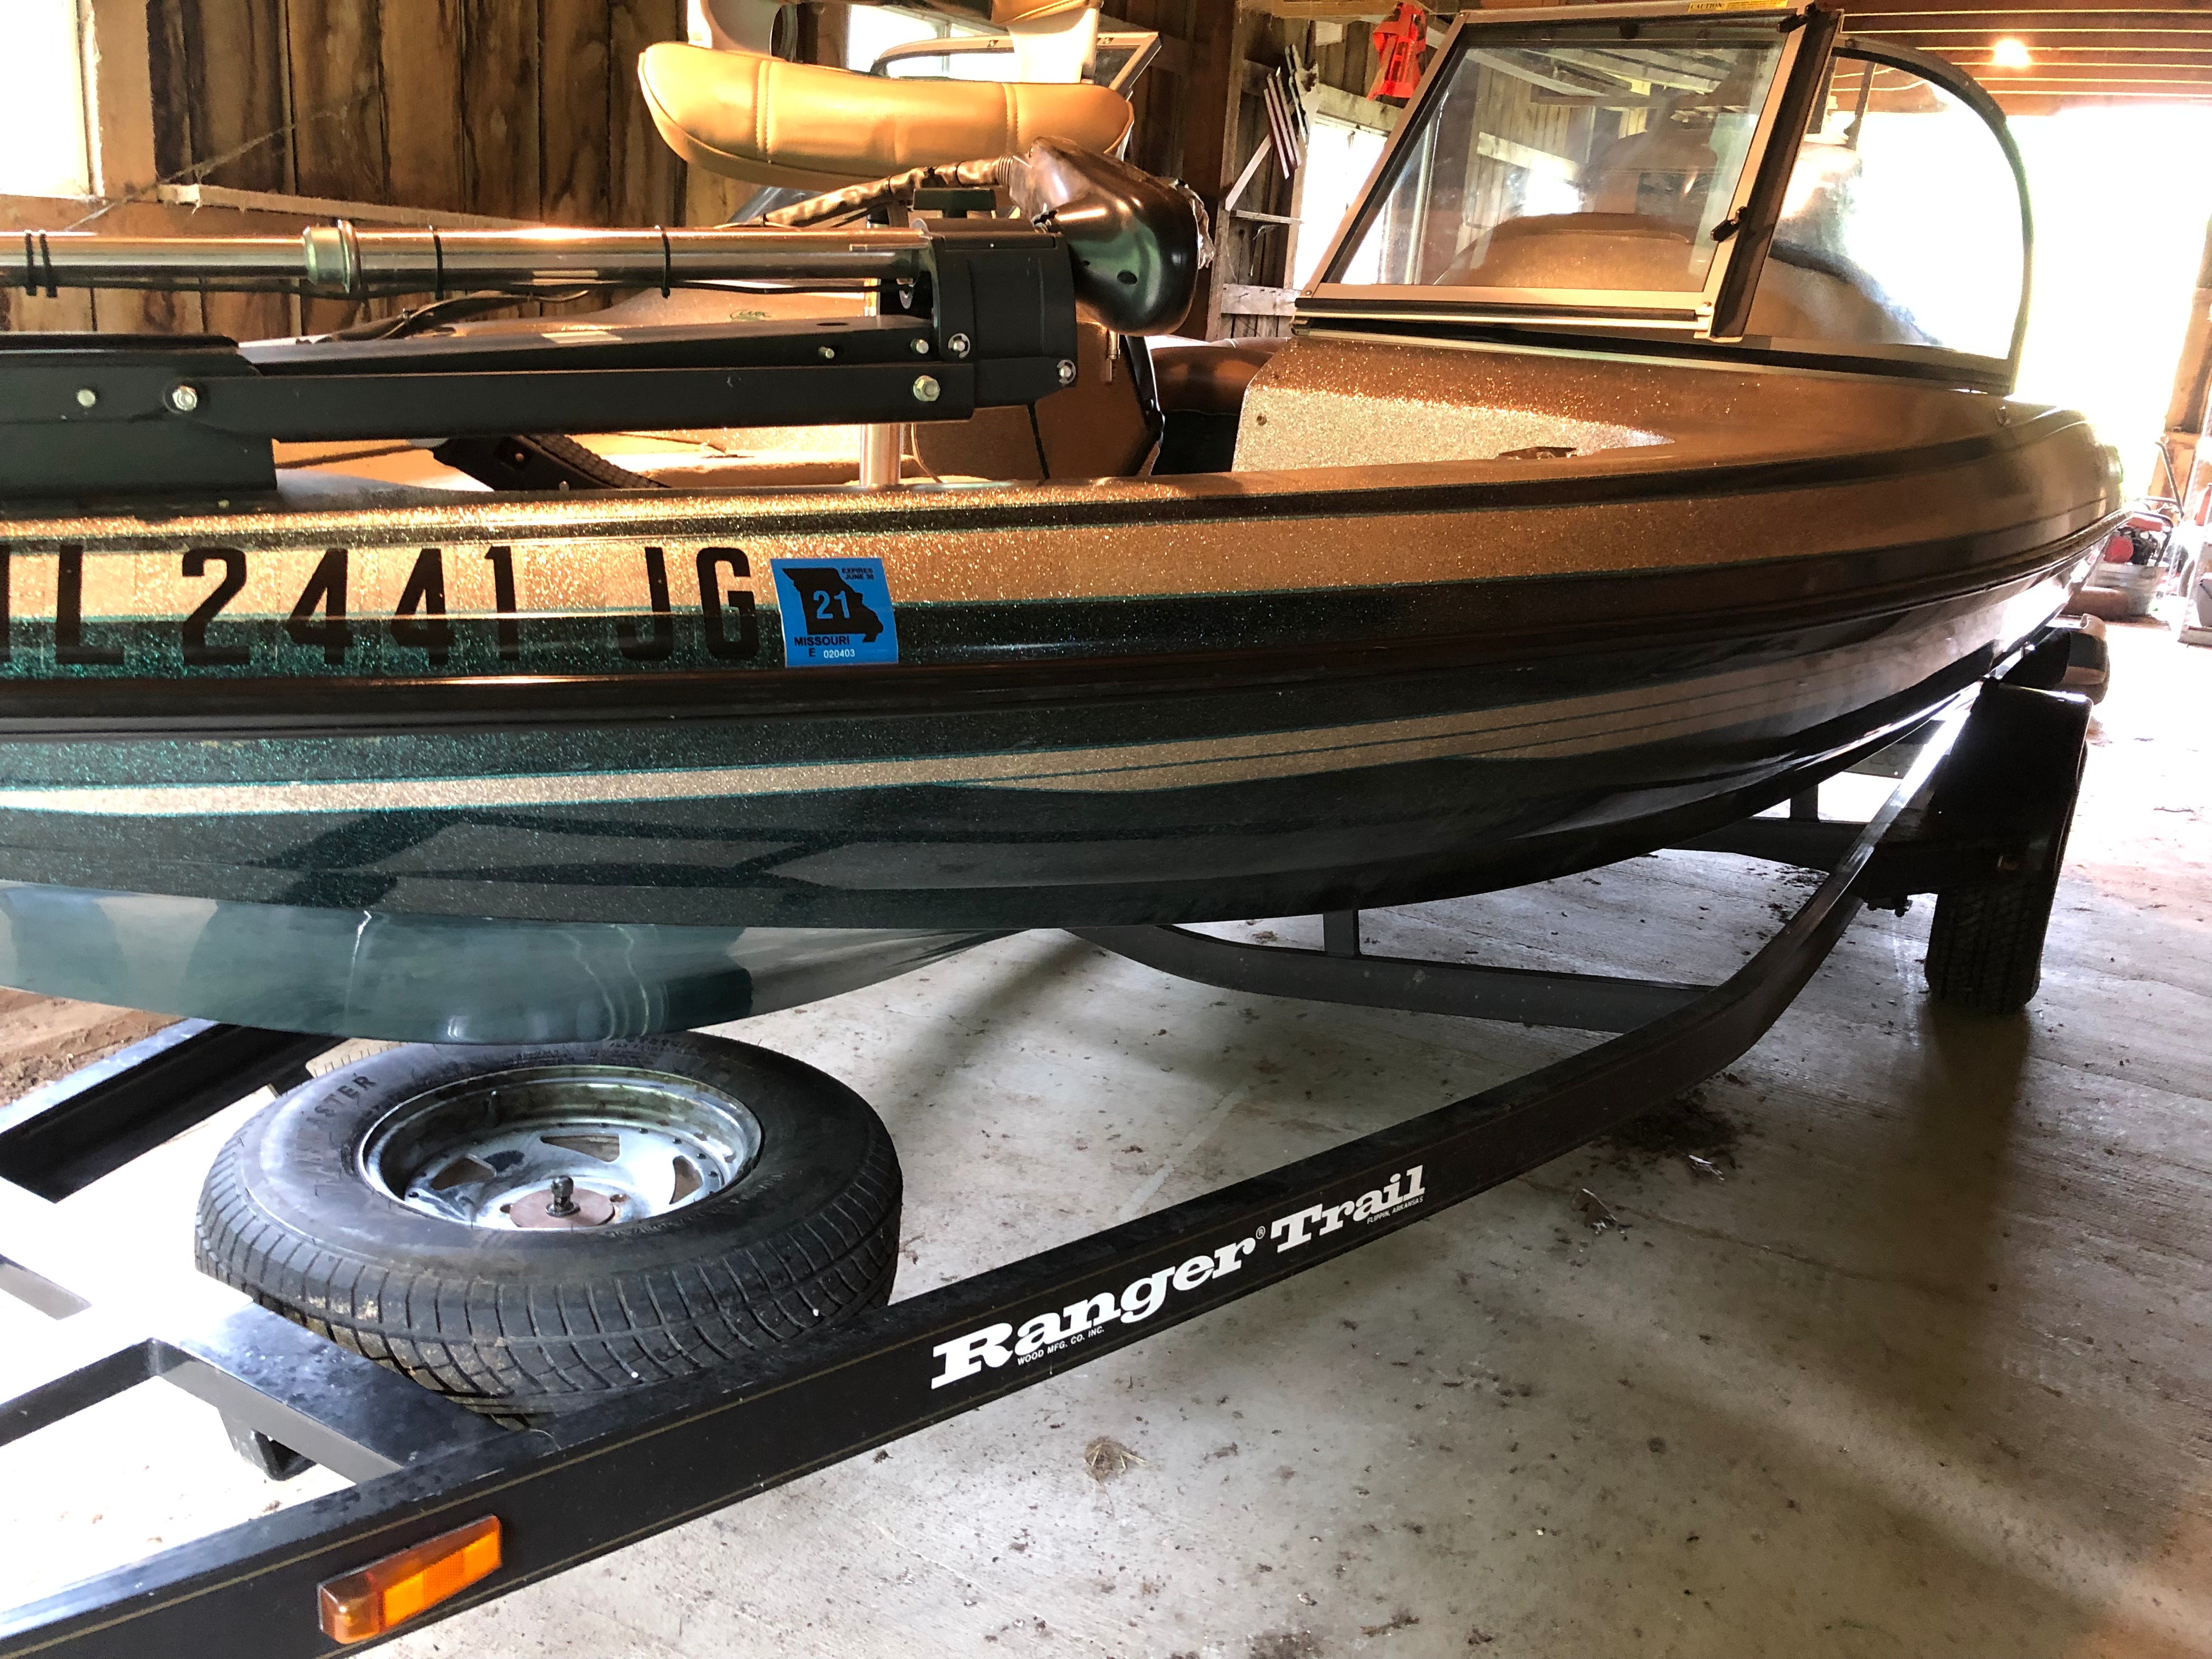 Used Ranger ski and fish boats for sale - boats.com